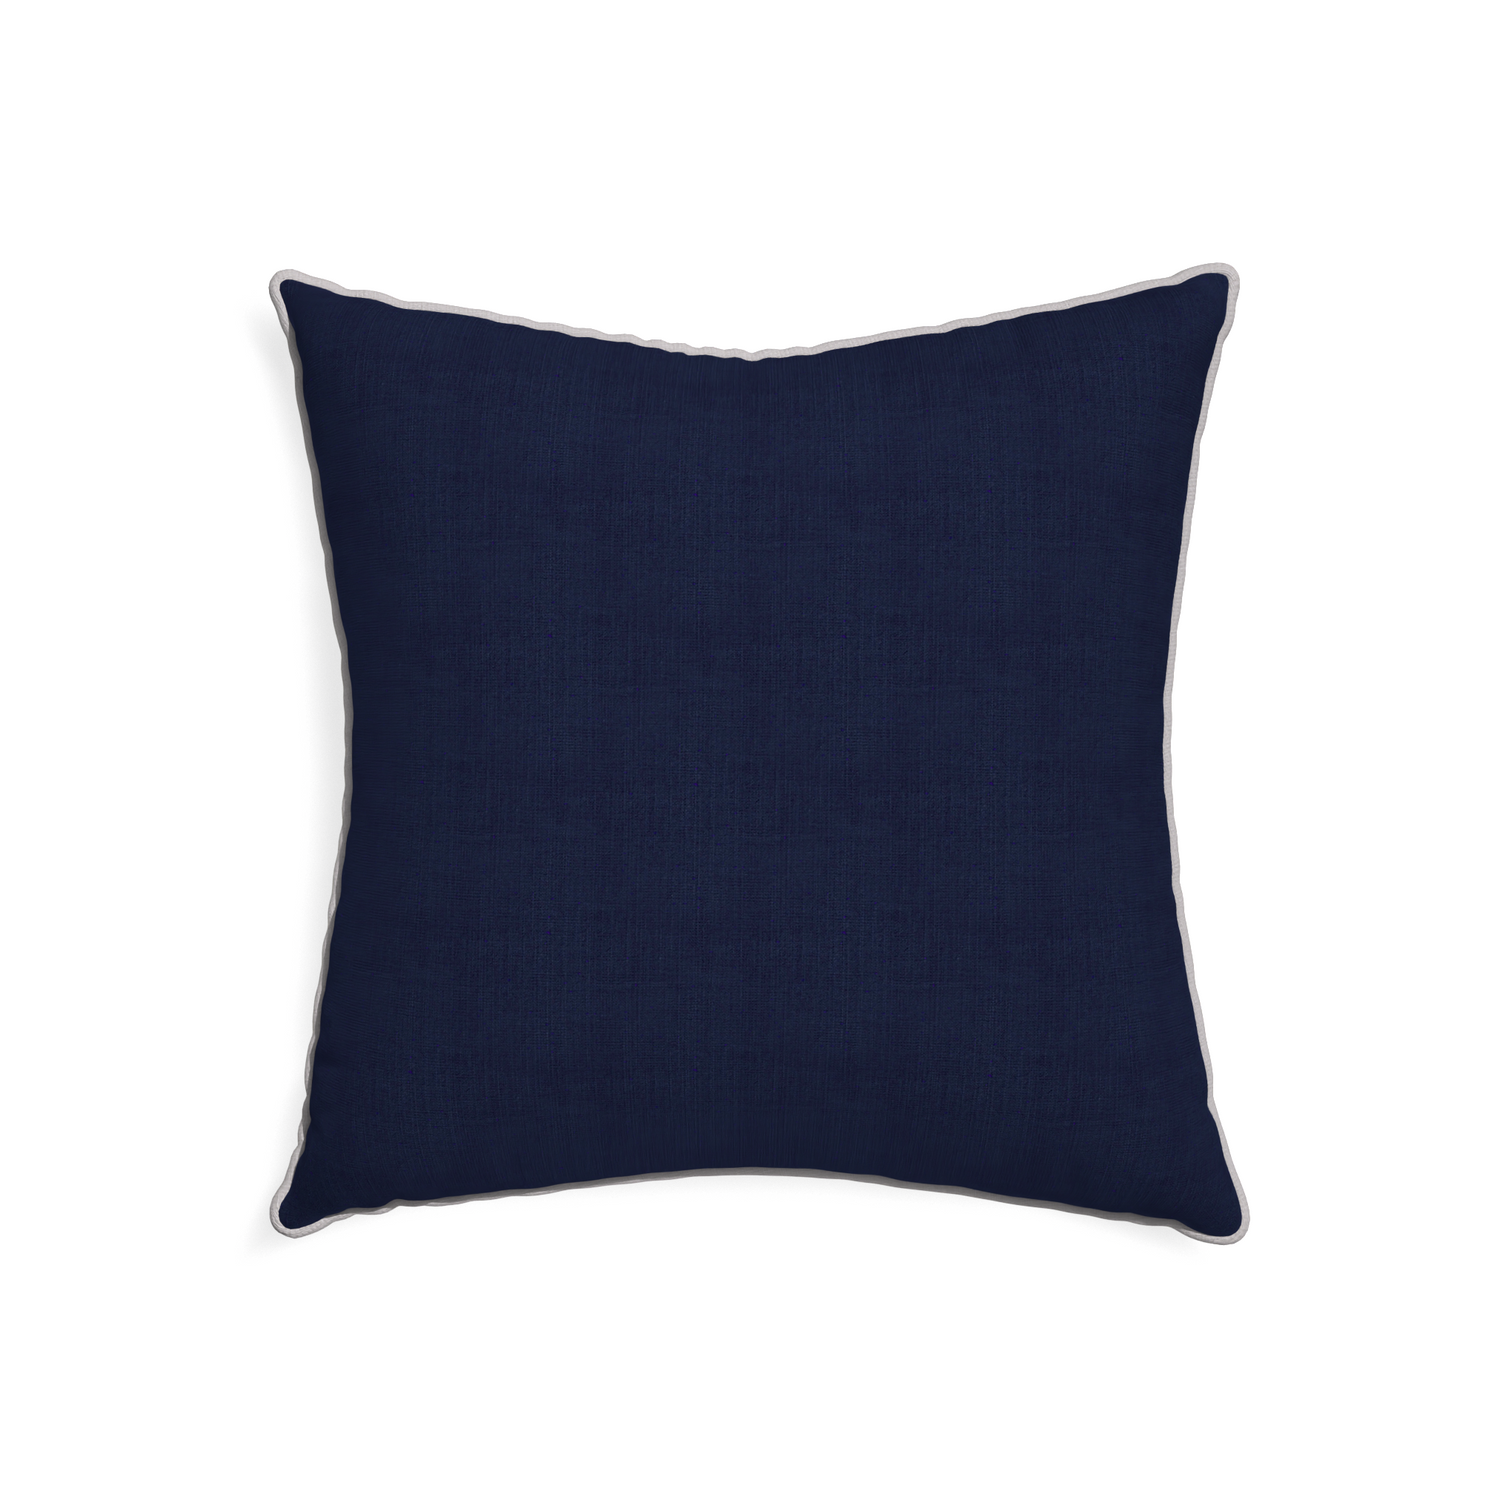 22-square midnight custom navy bluepillow with pebble piping on white background